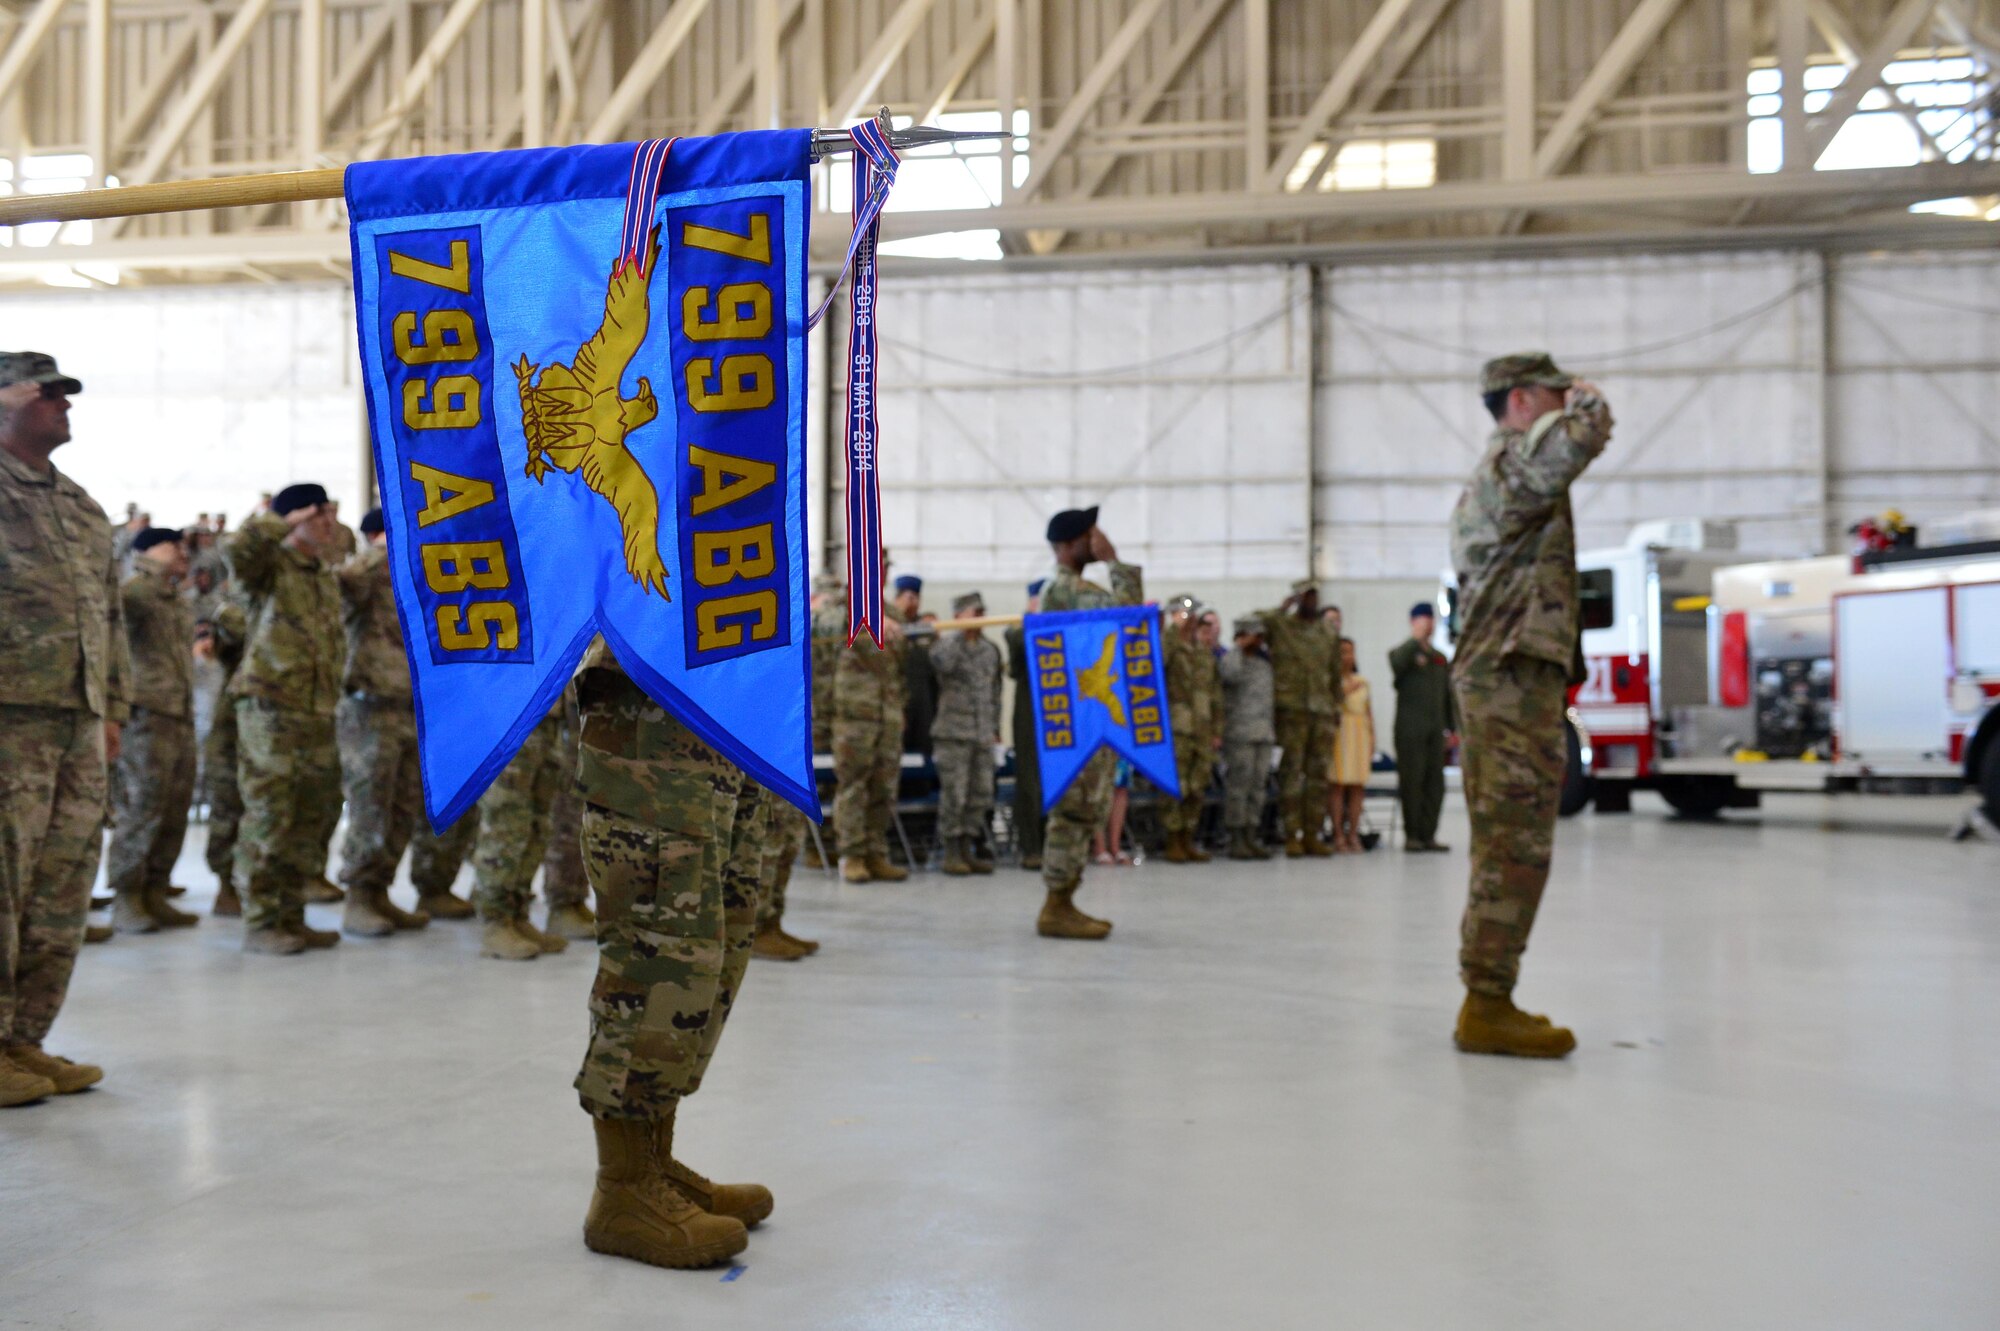 The 799th Air Base Squadron flag is presented for The National Anthem, during the 432nd Mission Support Group activation ceremony at Creech Air Force Base, Nevada, July 11, 2019. Standing up a mission support group for the 432nd Wing was among the first steps to prepare the wing to take installation command. (U.S. Air Force photo by Senior Airman Haley Stevens)